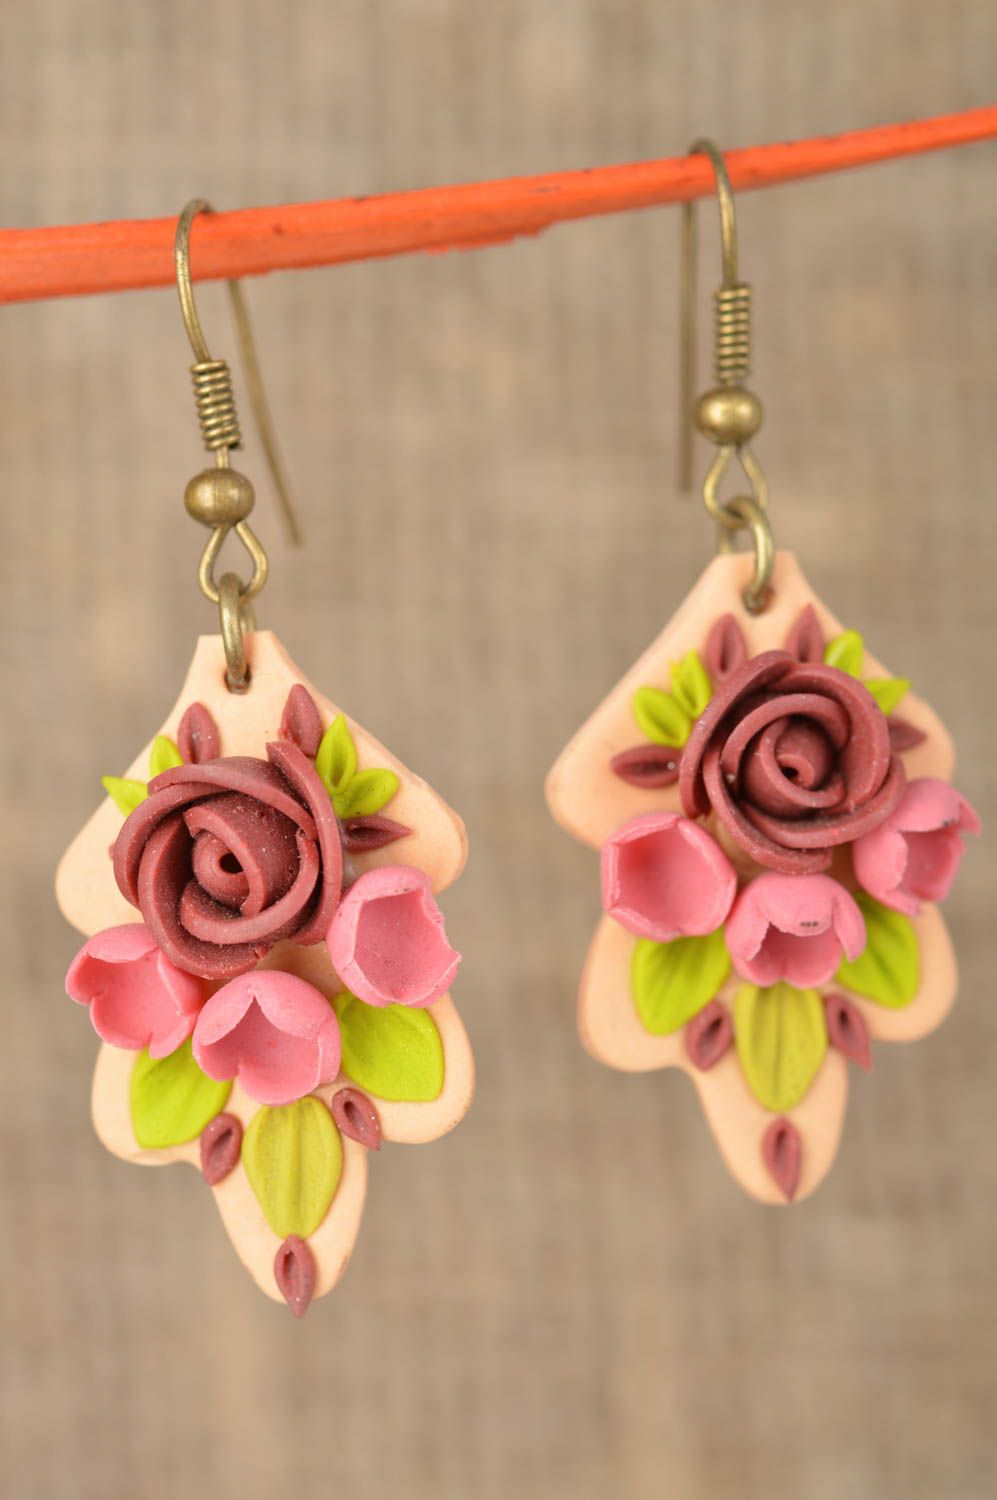 Handmade earrings with charms made of polymer clay designer female accessory photo 1